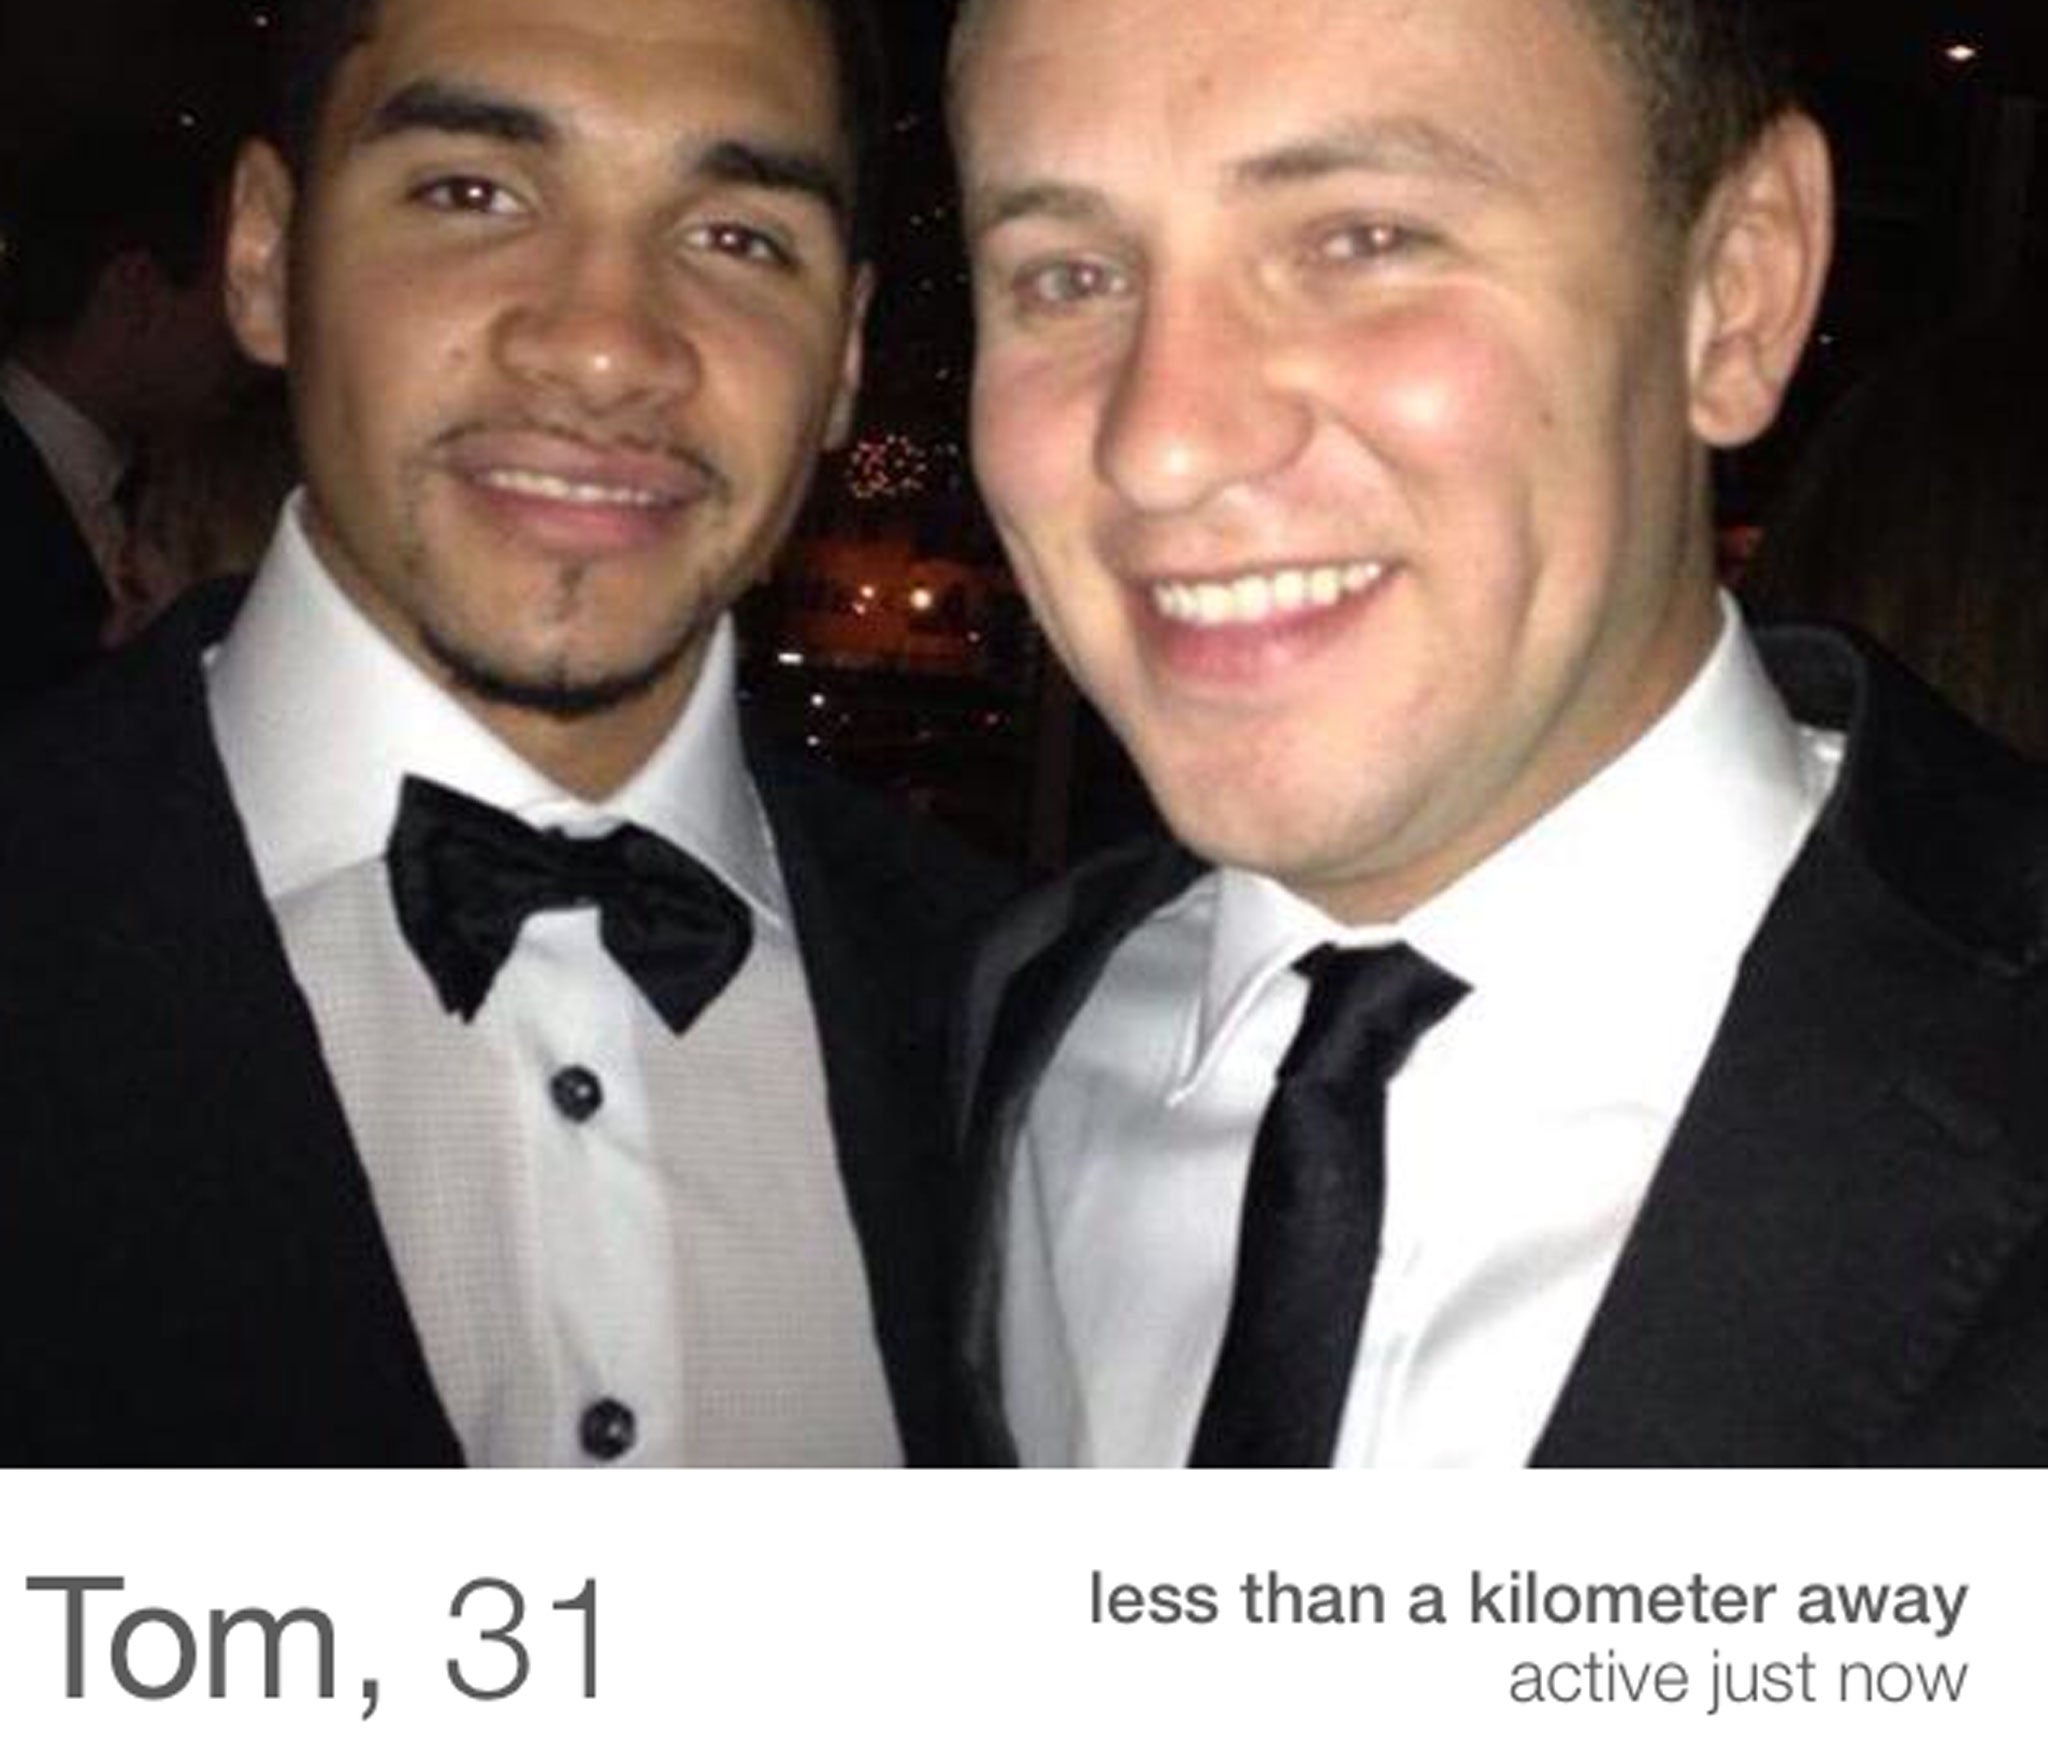 Have you seen this man on Tinder? Swipe right to find out more...